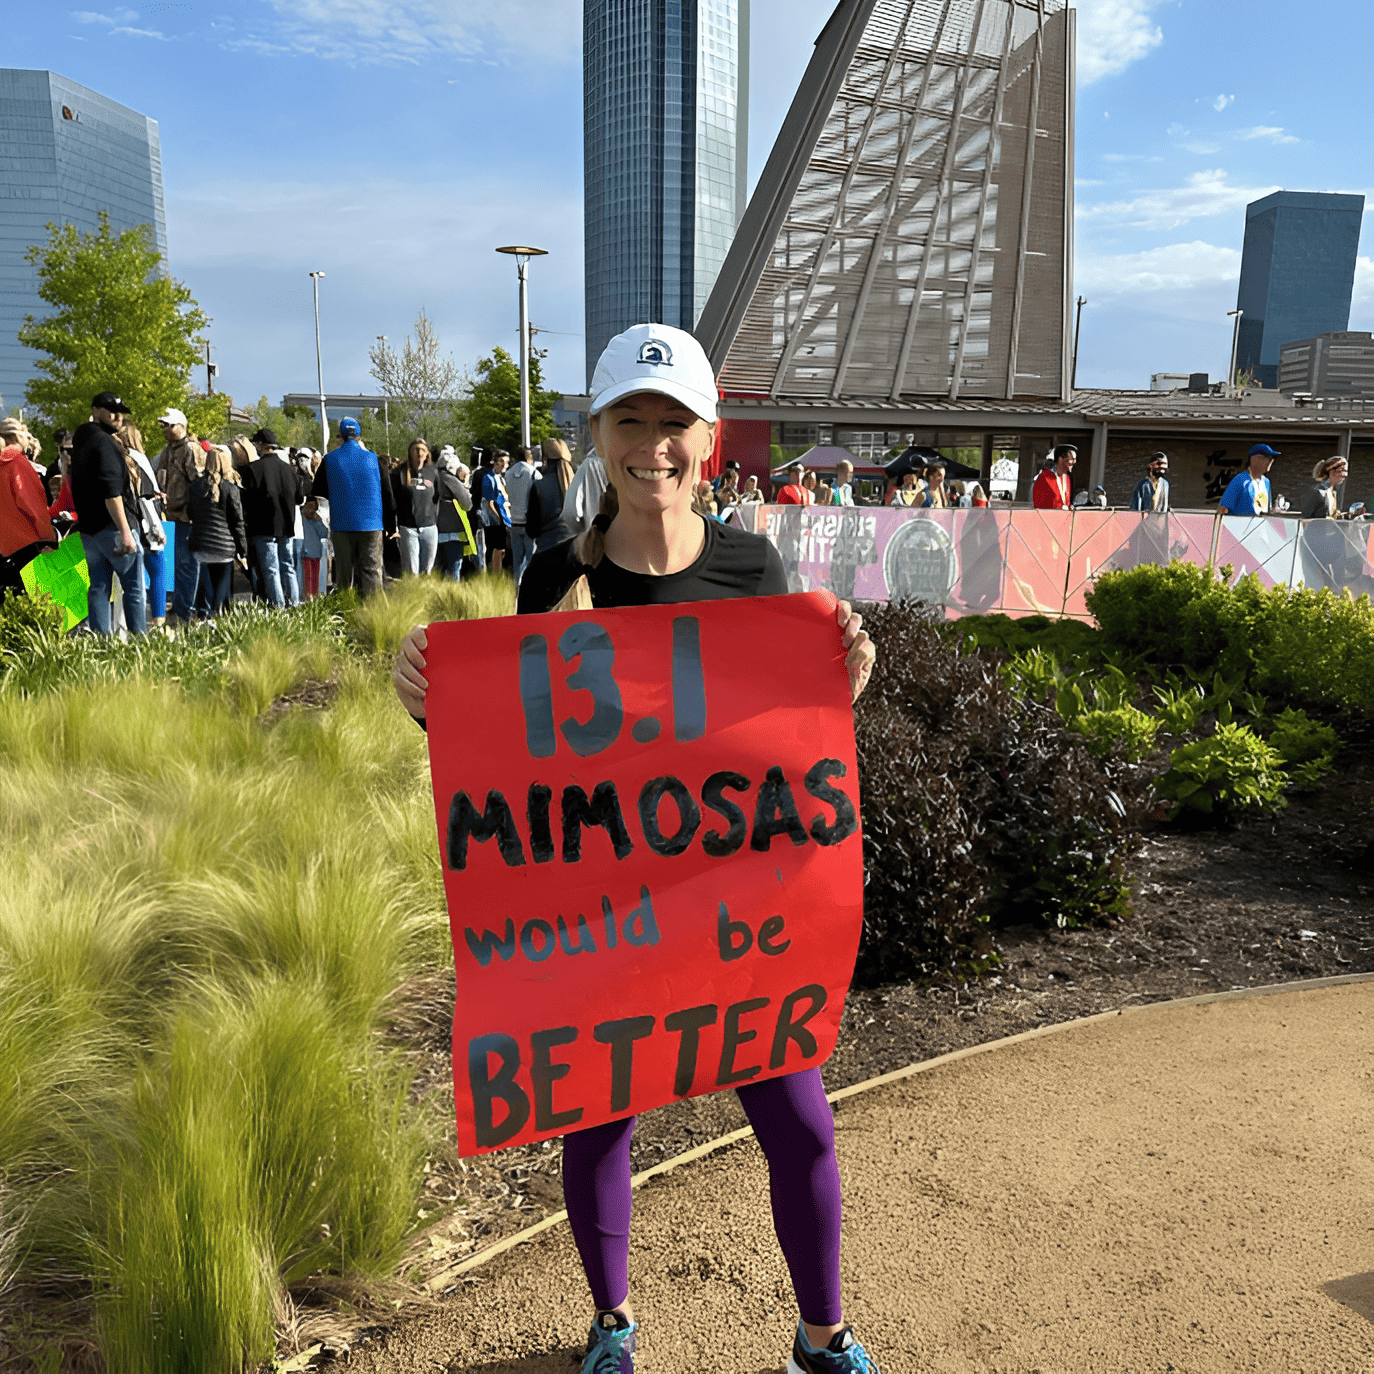 A woman holding a race day sign that says 13.1 mimosas would be better.